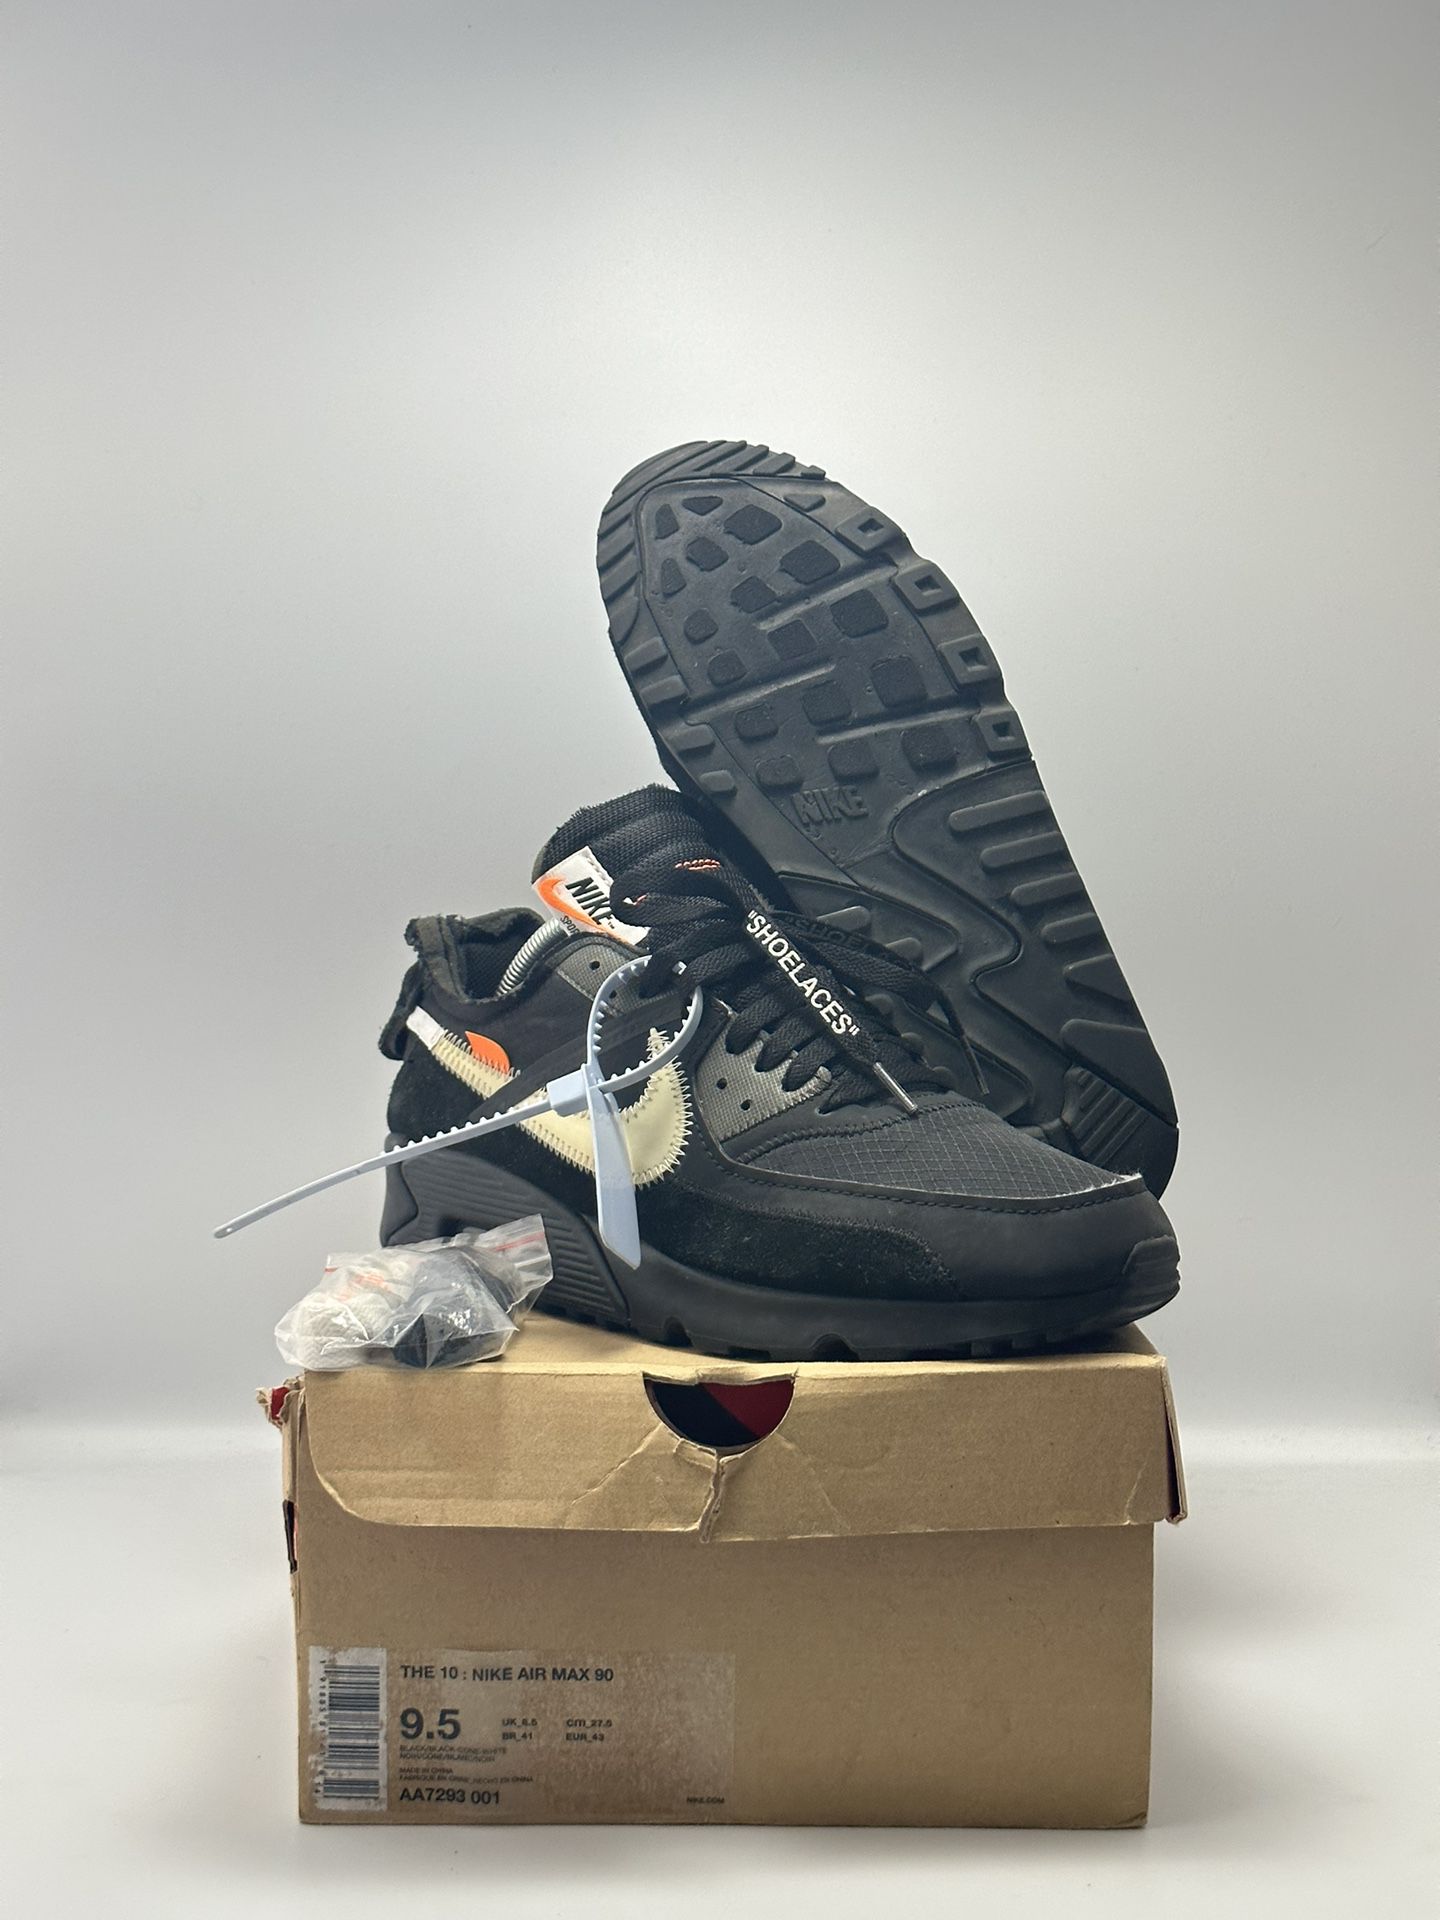 Off White Air Max 90 for Queens, NY -